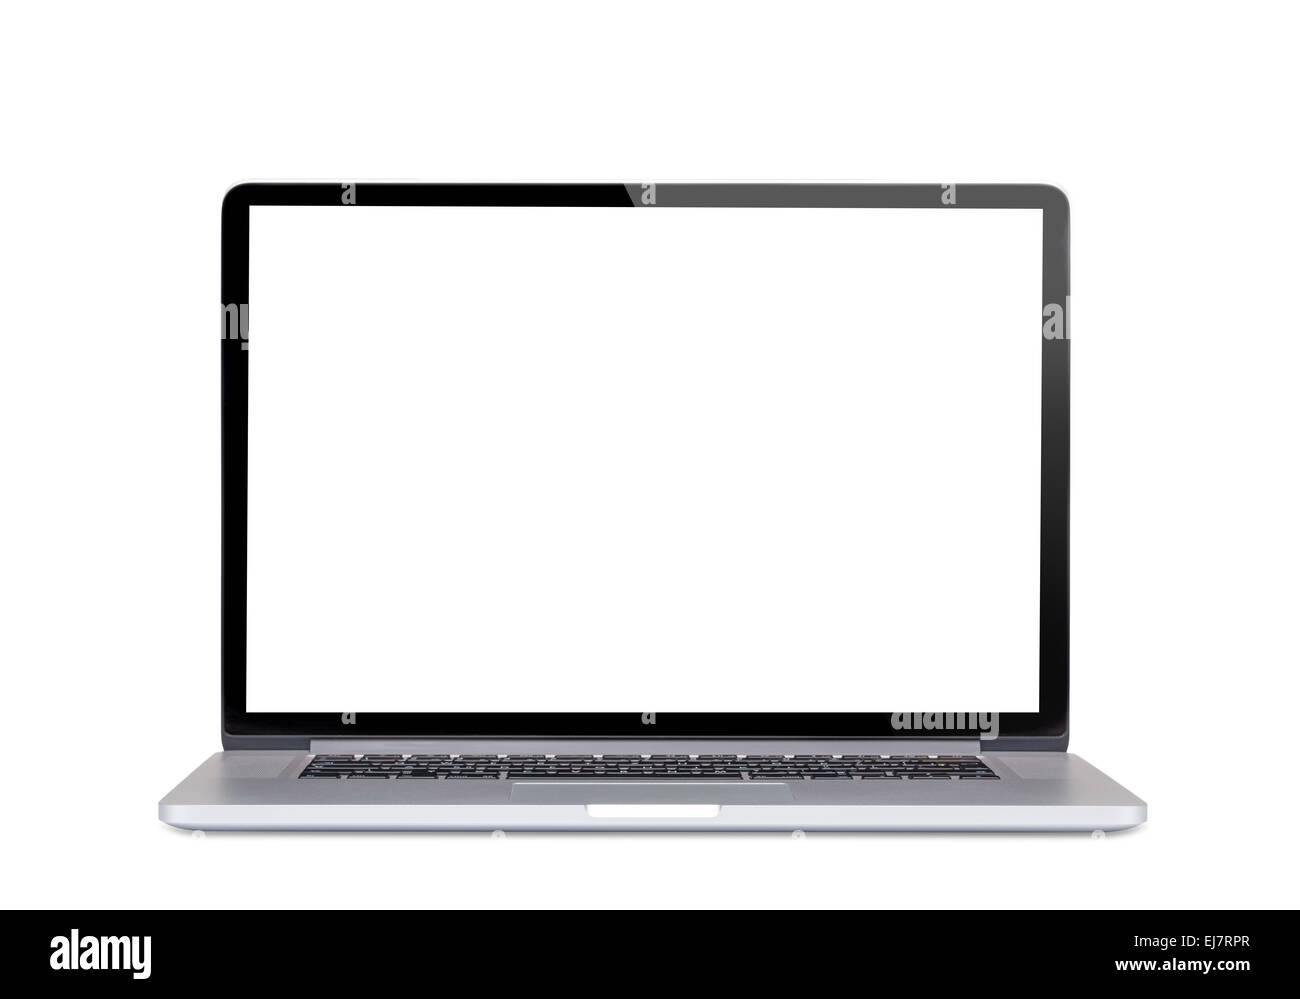 Computer display isolated on white background. Stock Photo